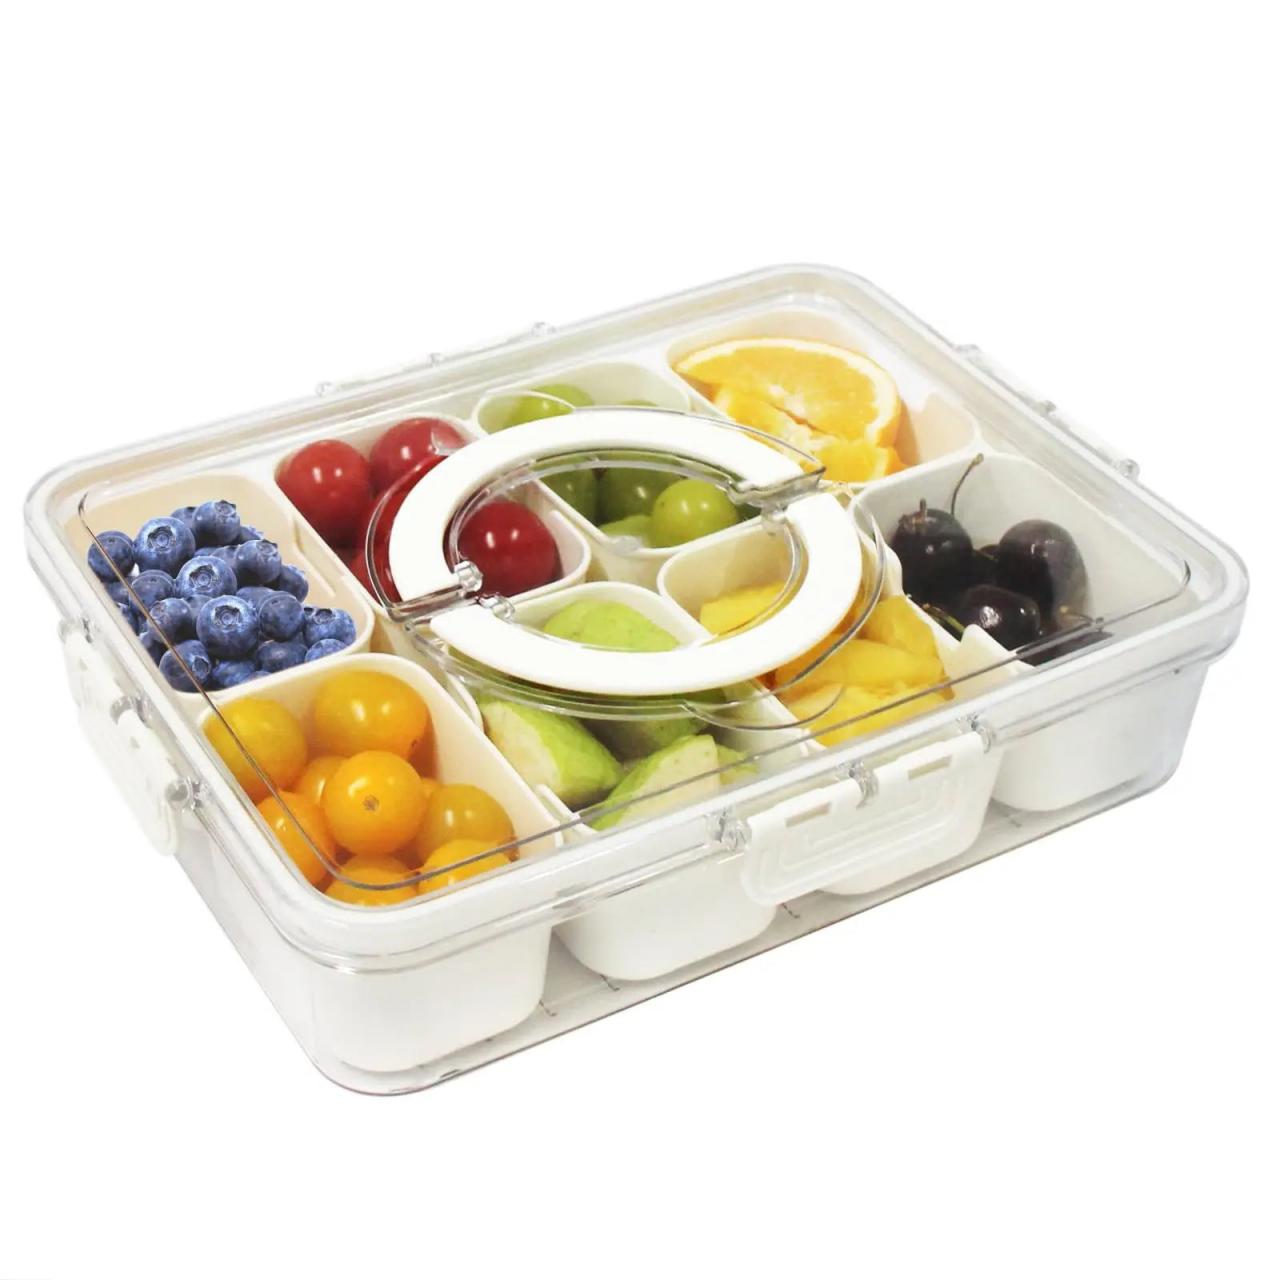 Bento-style Lunch Box With Compartments And Lids